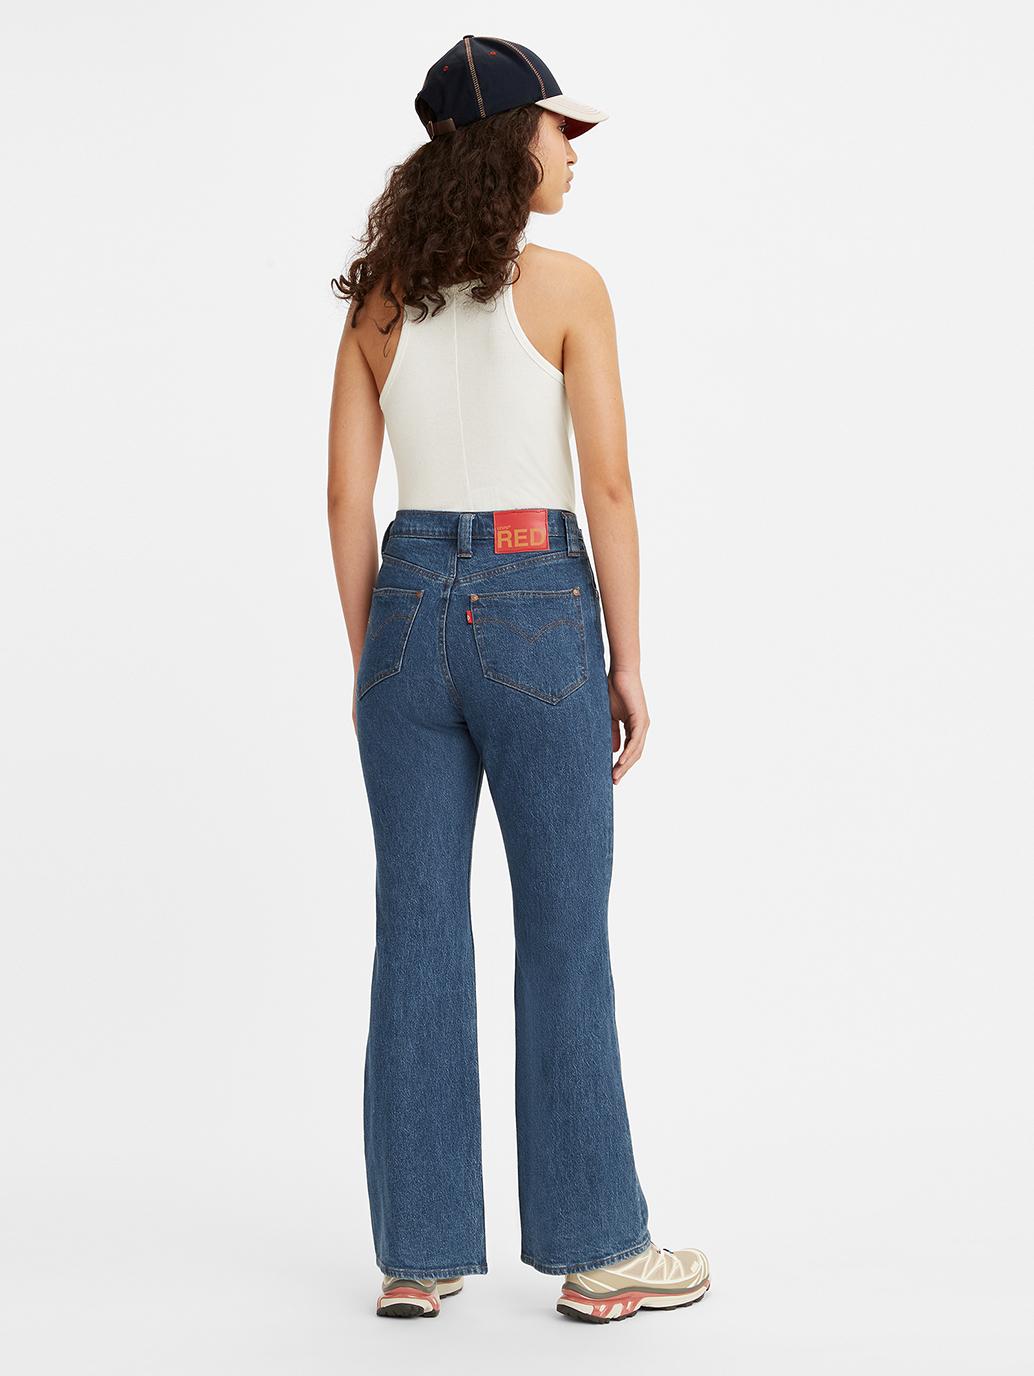 Levi's® Hong Kong red womens ribcage bootcut womens jeans A26800000 02 Back